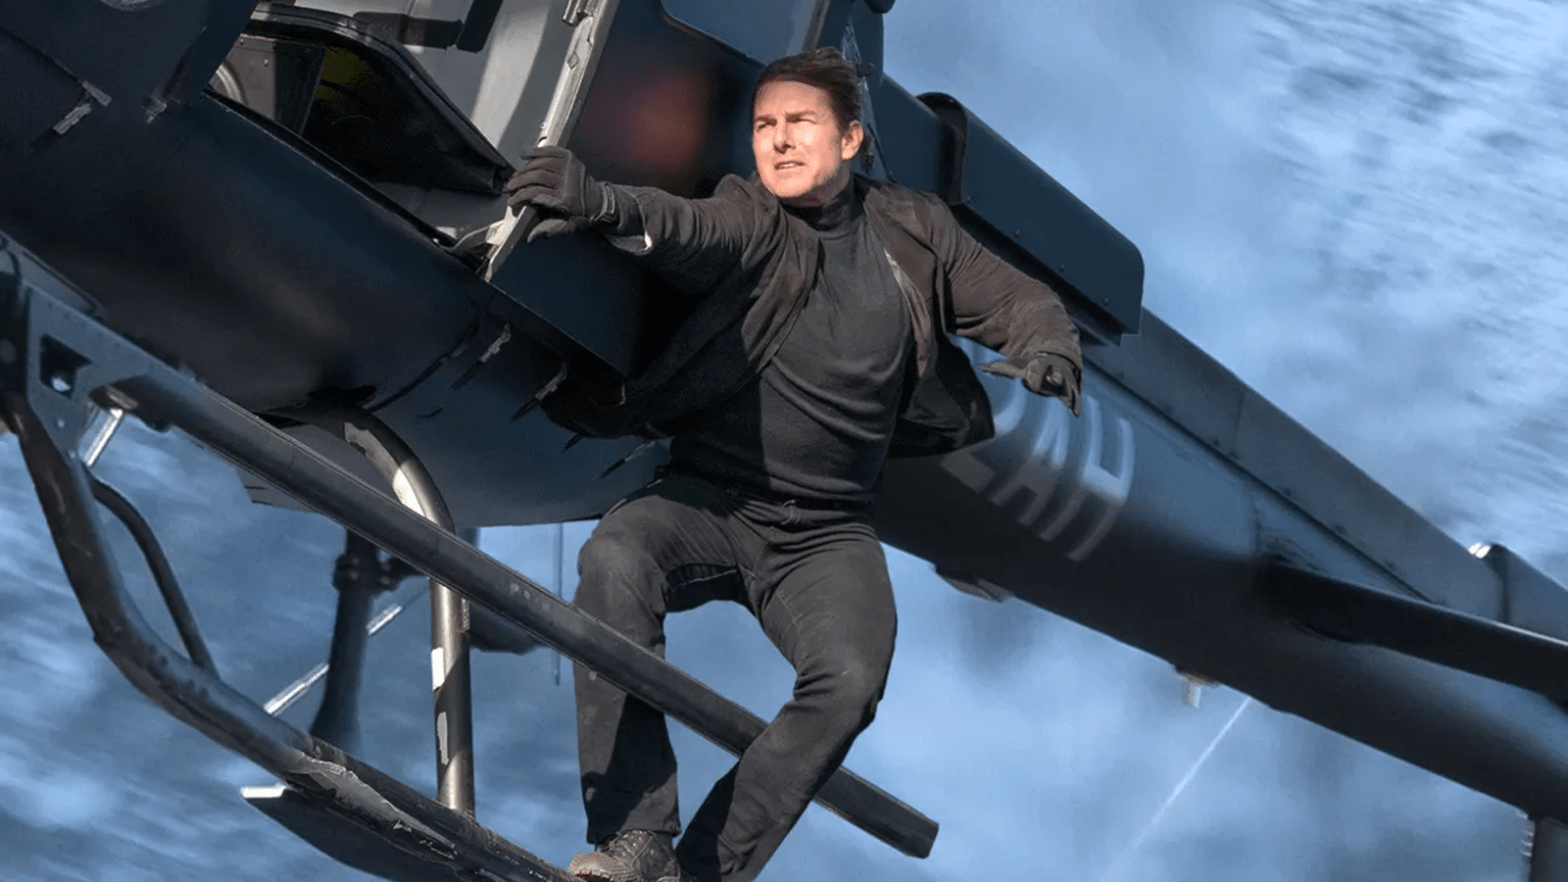 If you thought this stunt in Mission: Impossible — Fallout was bonkers, wait until you see what Tom Cruise does in Mission: Impossible 7. (Image: Paramount)